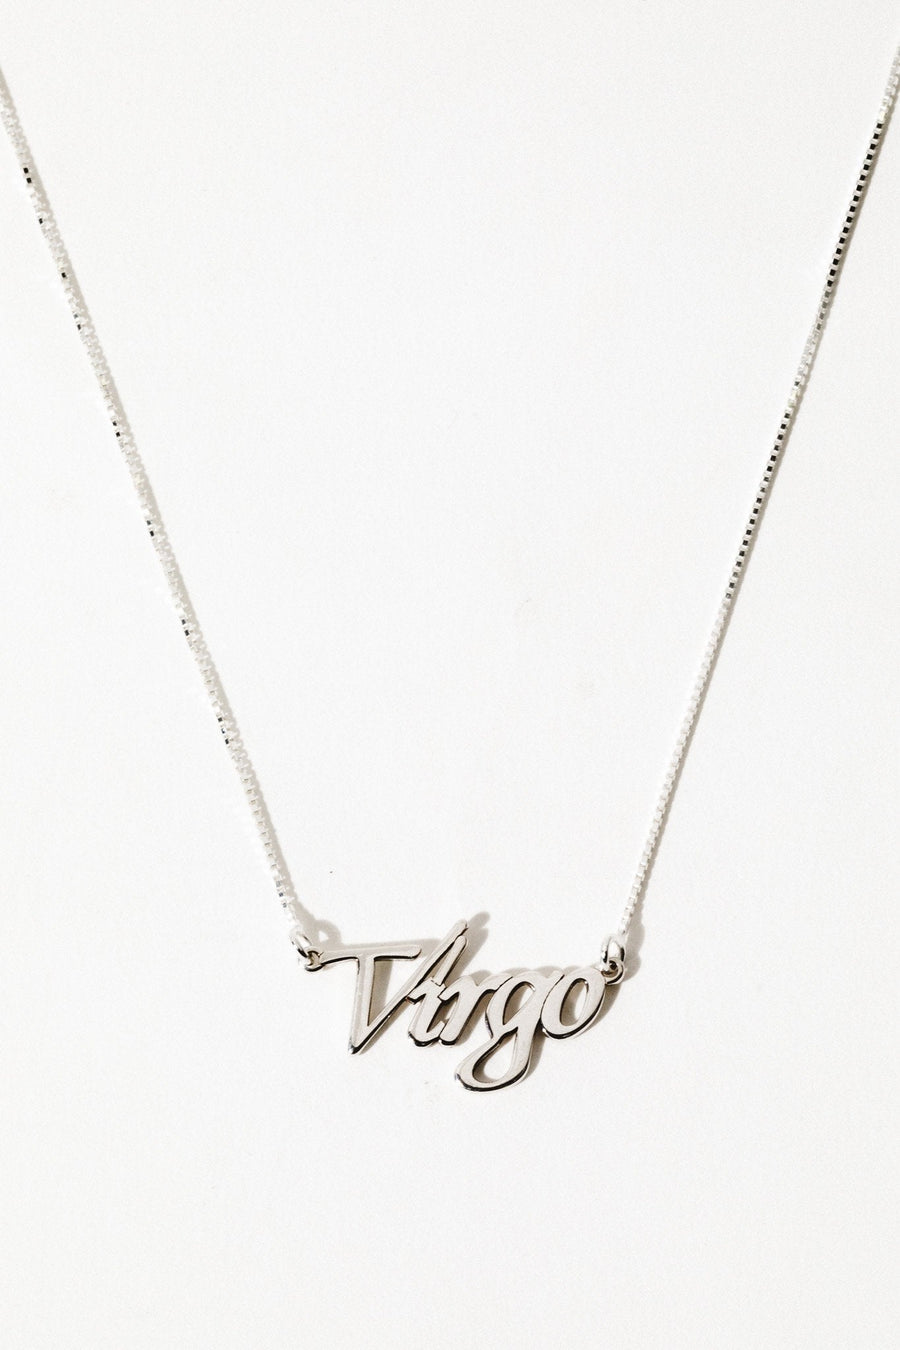 The Goth Booth Jewelry Virgo / Silver / 16 inches Signature Zodiac Necklace